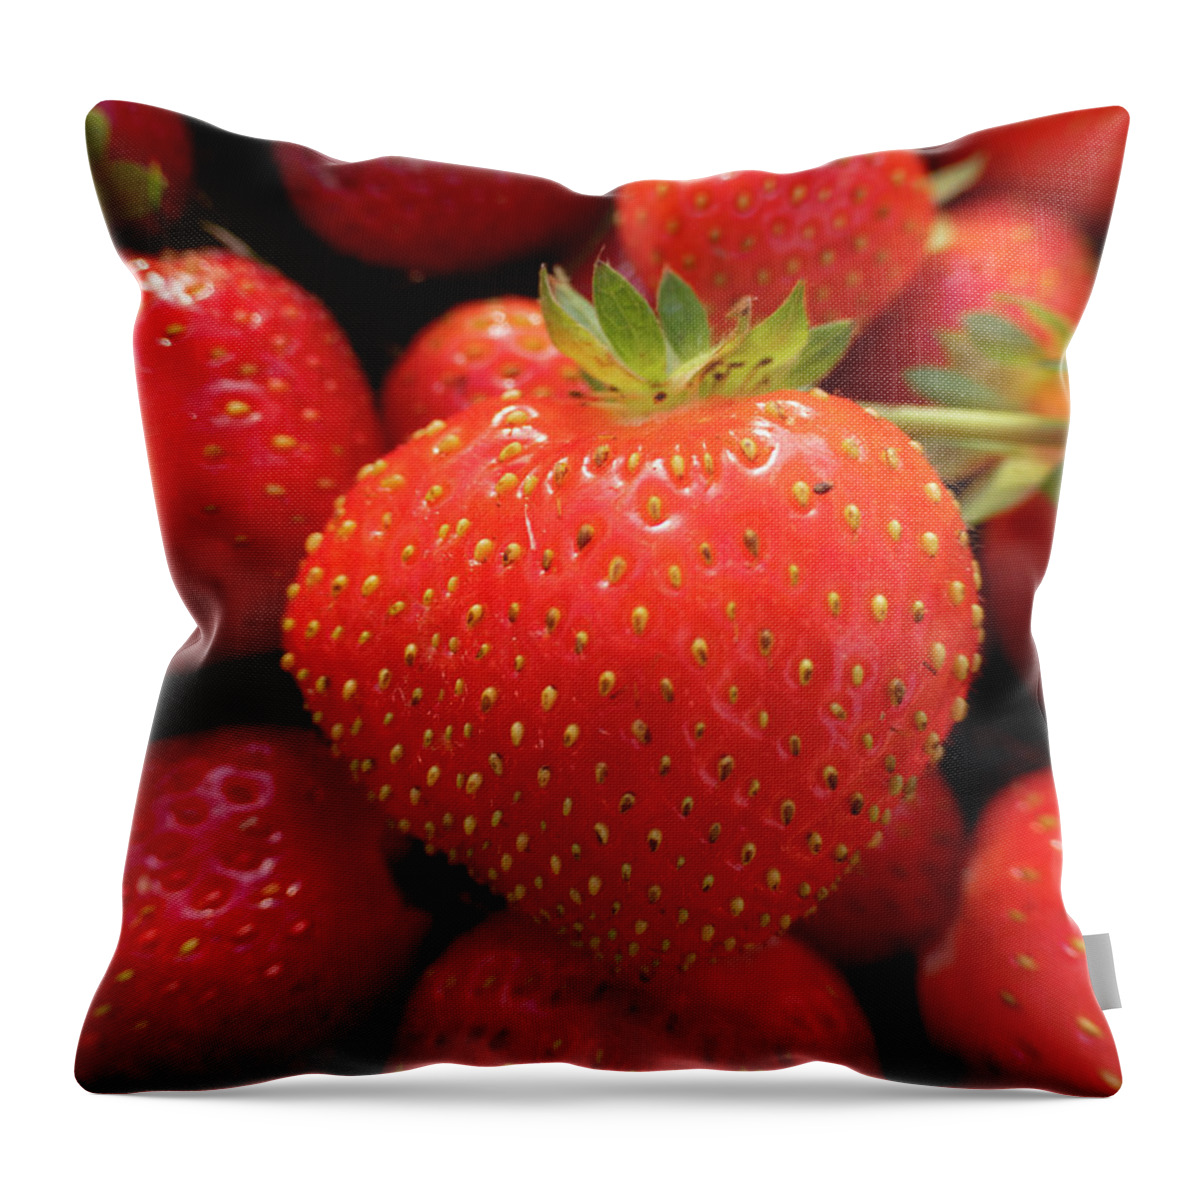 Strawberries Throw Pillow featuring the photograph Fresh Strawberries by Karen Rispin